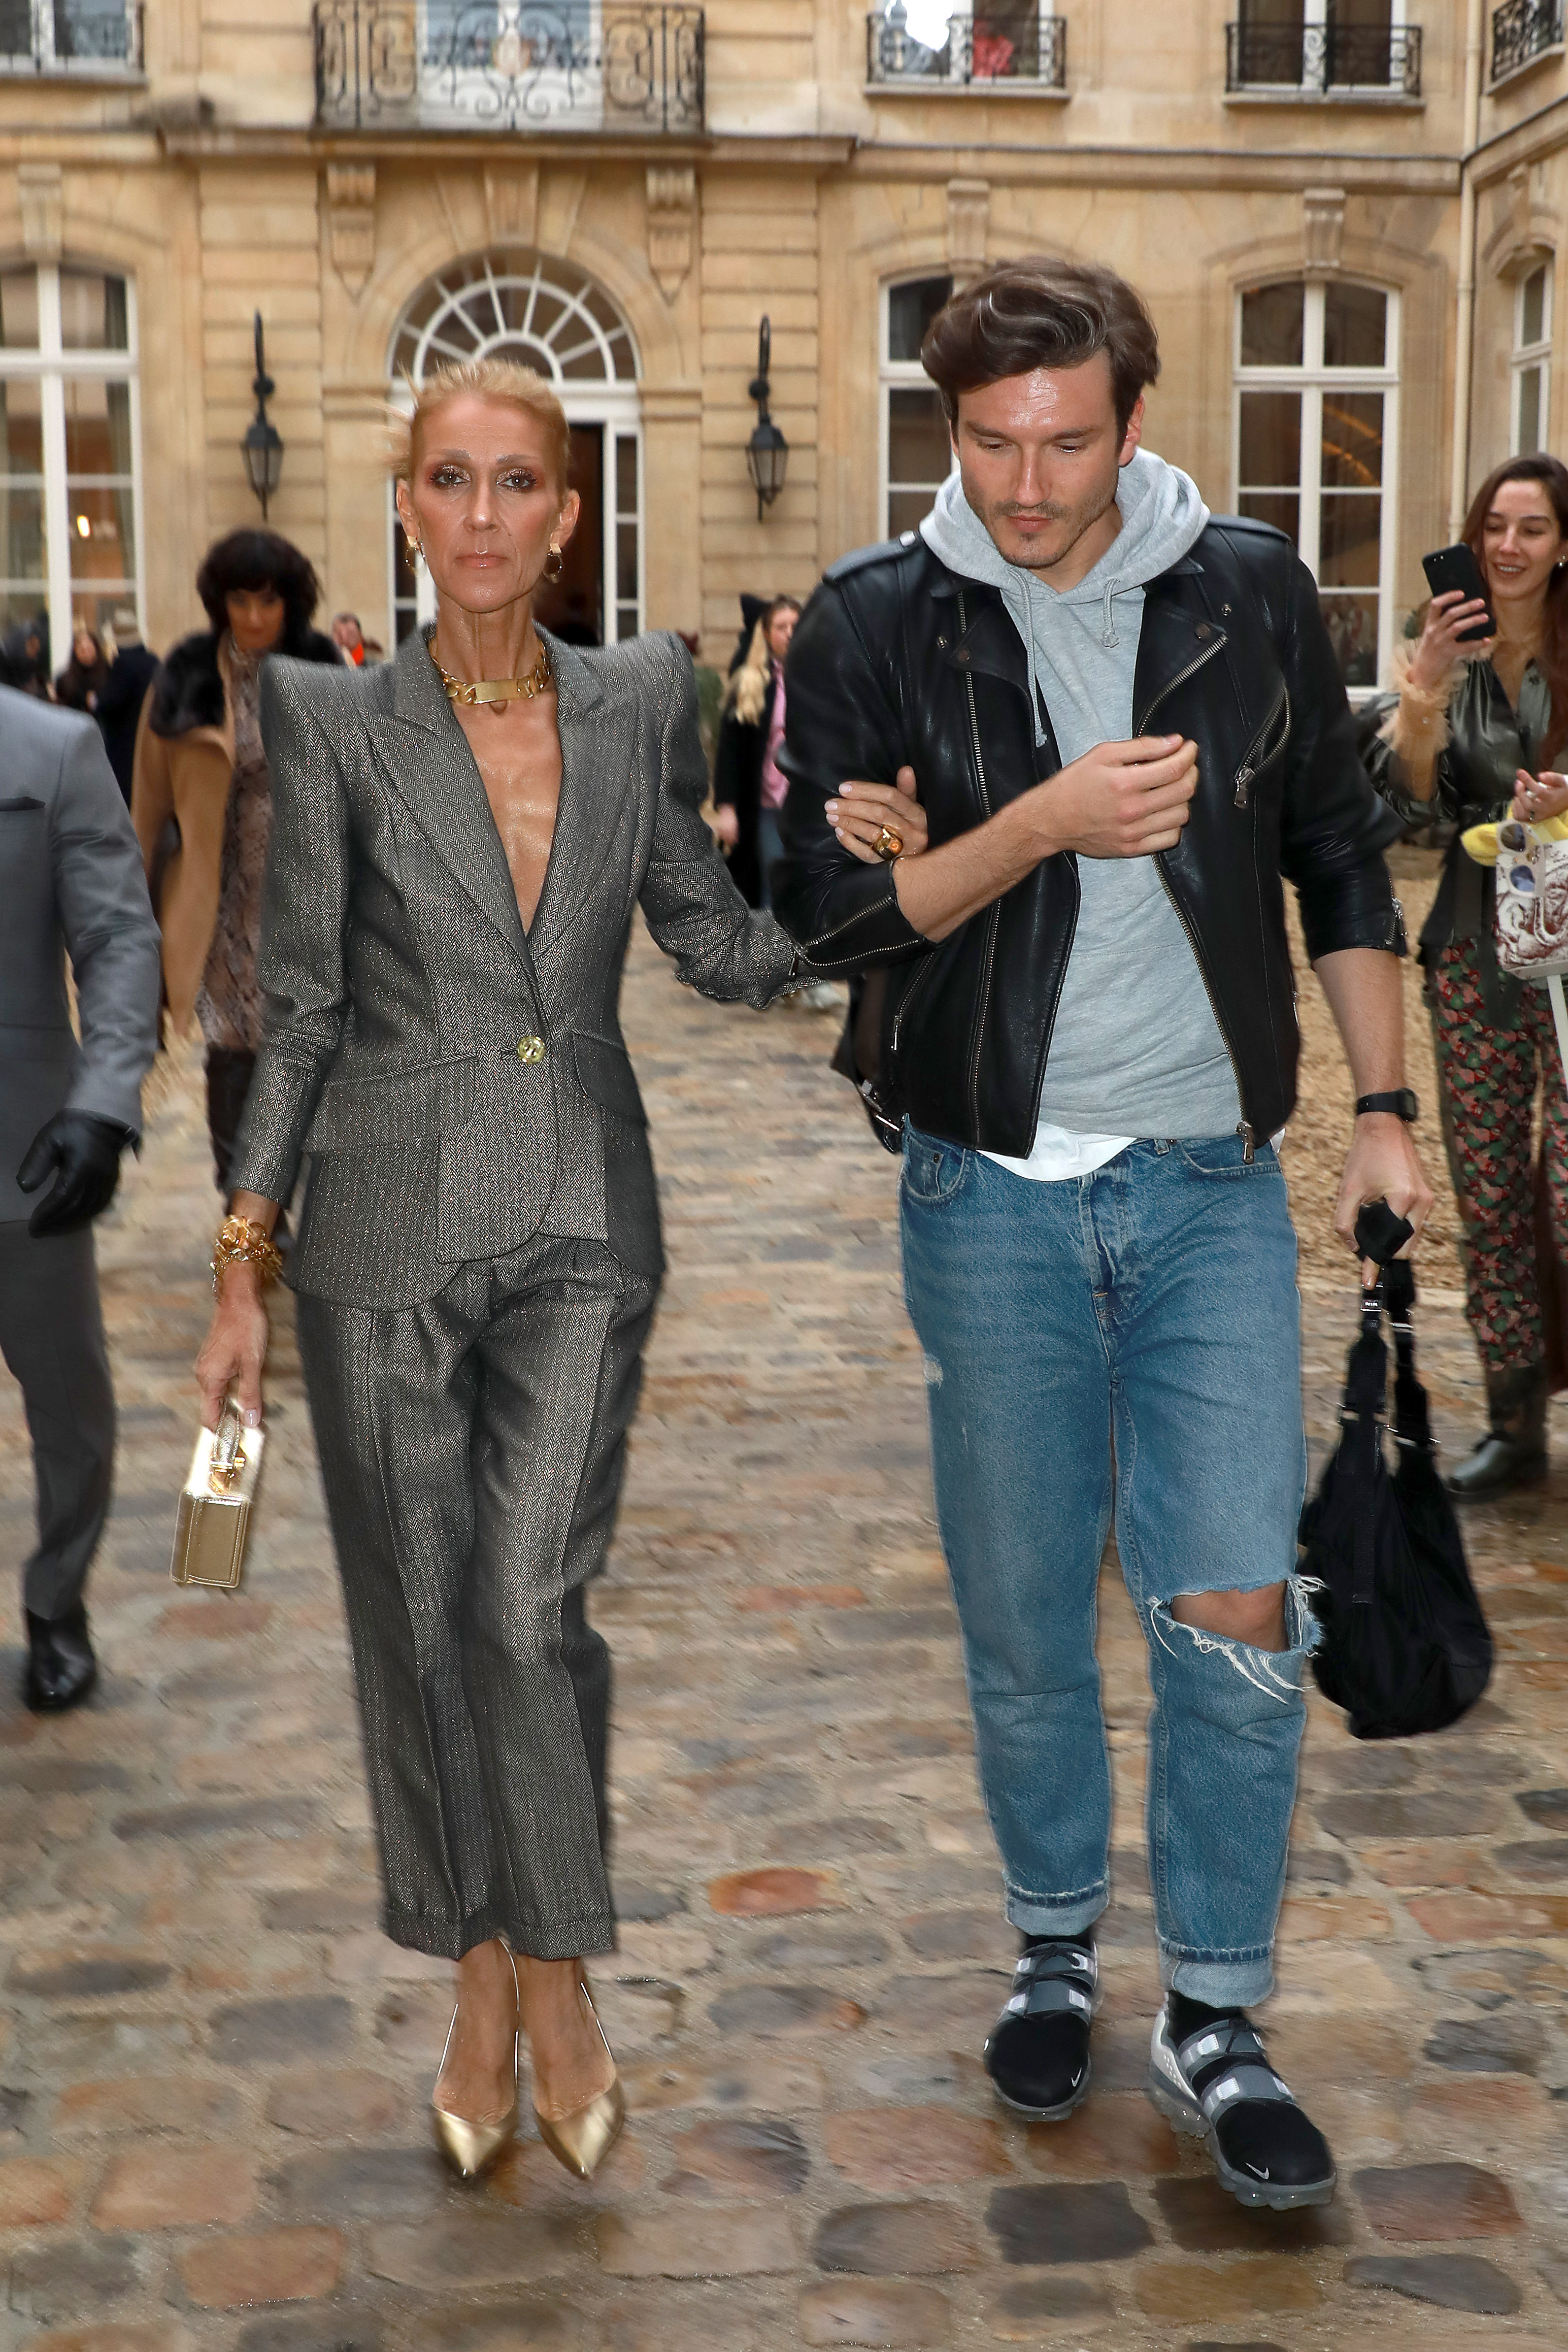 Celine Dion and Pepe Munoz attend the RVDK Ronald Van Der Kemp Haute Couture Spring Summer 2019 show as part of Paris Fashion Week on January 23, 2019 in Paris, France. | Source: Getty Images